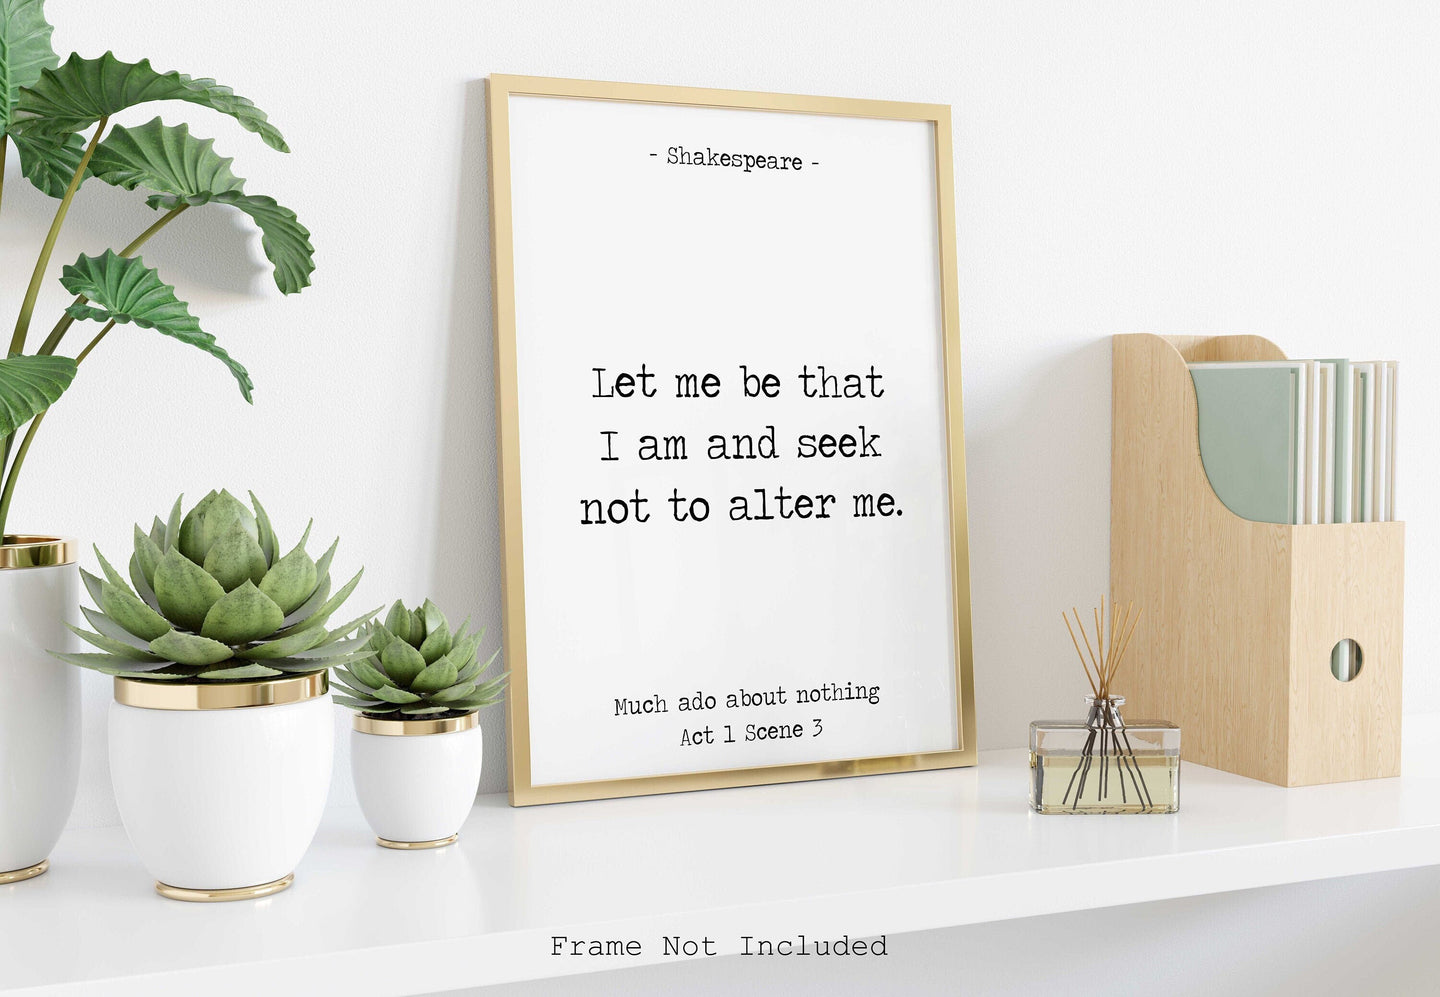 Much Ado About Nothing Print - Let me be that I am and seek not to alter me - Shakespeare print for Home, nursery decor, library print